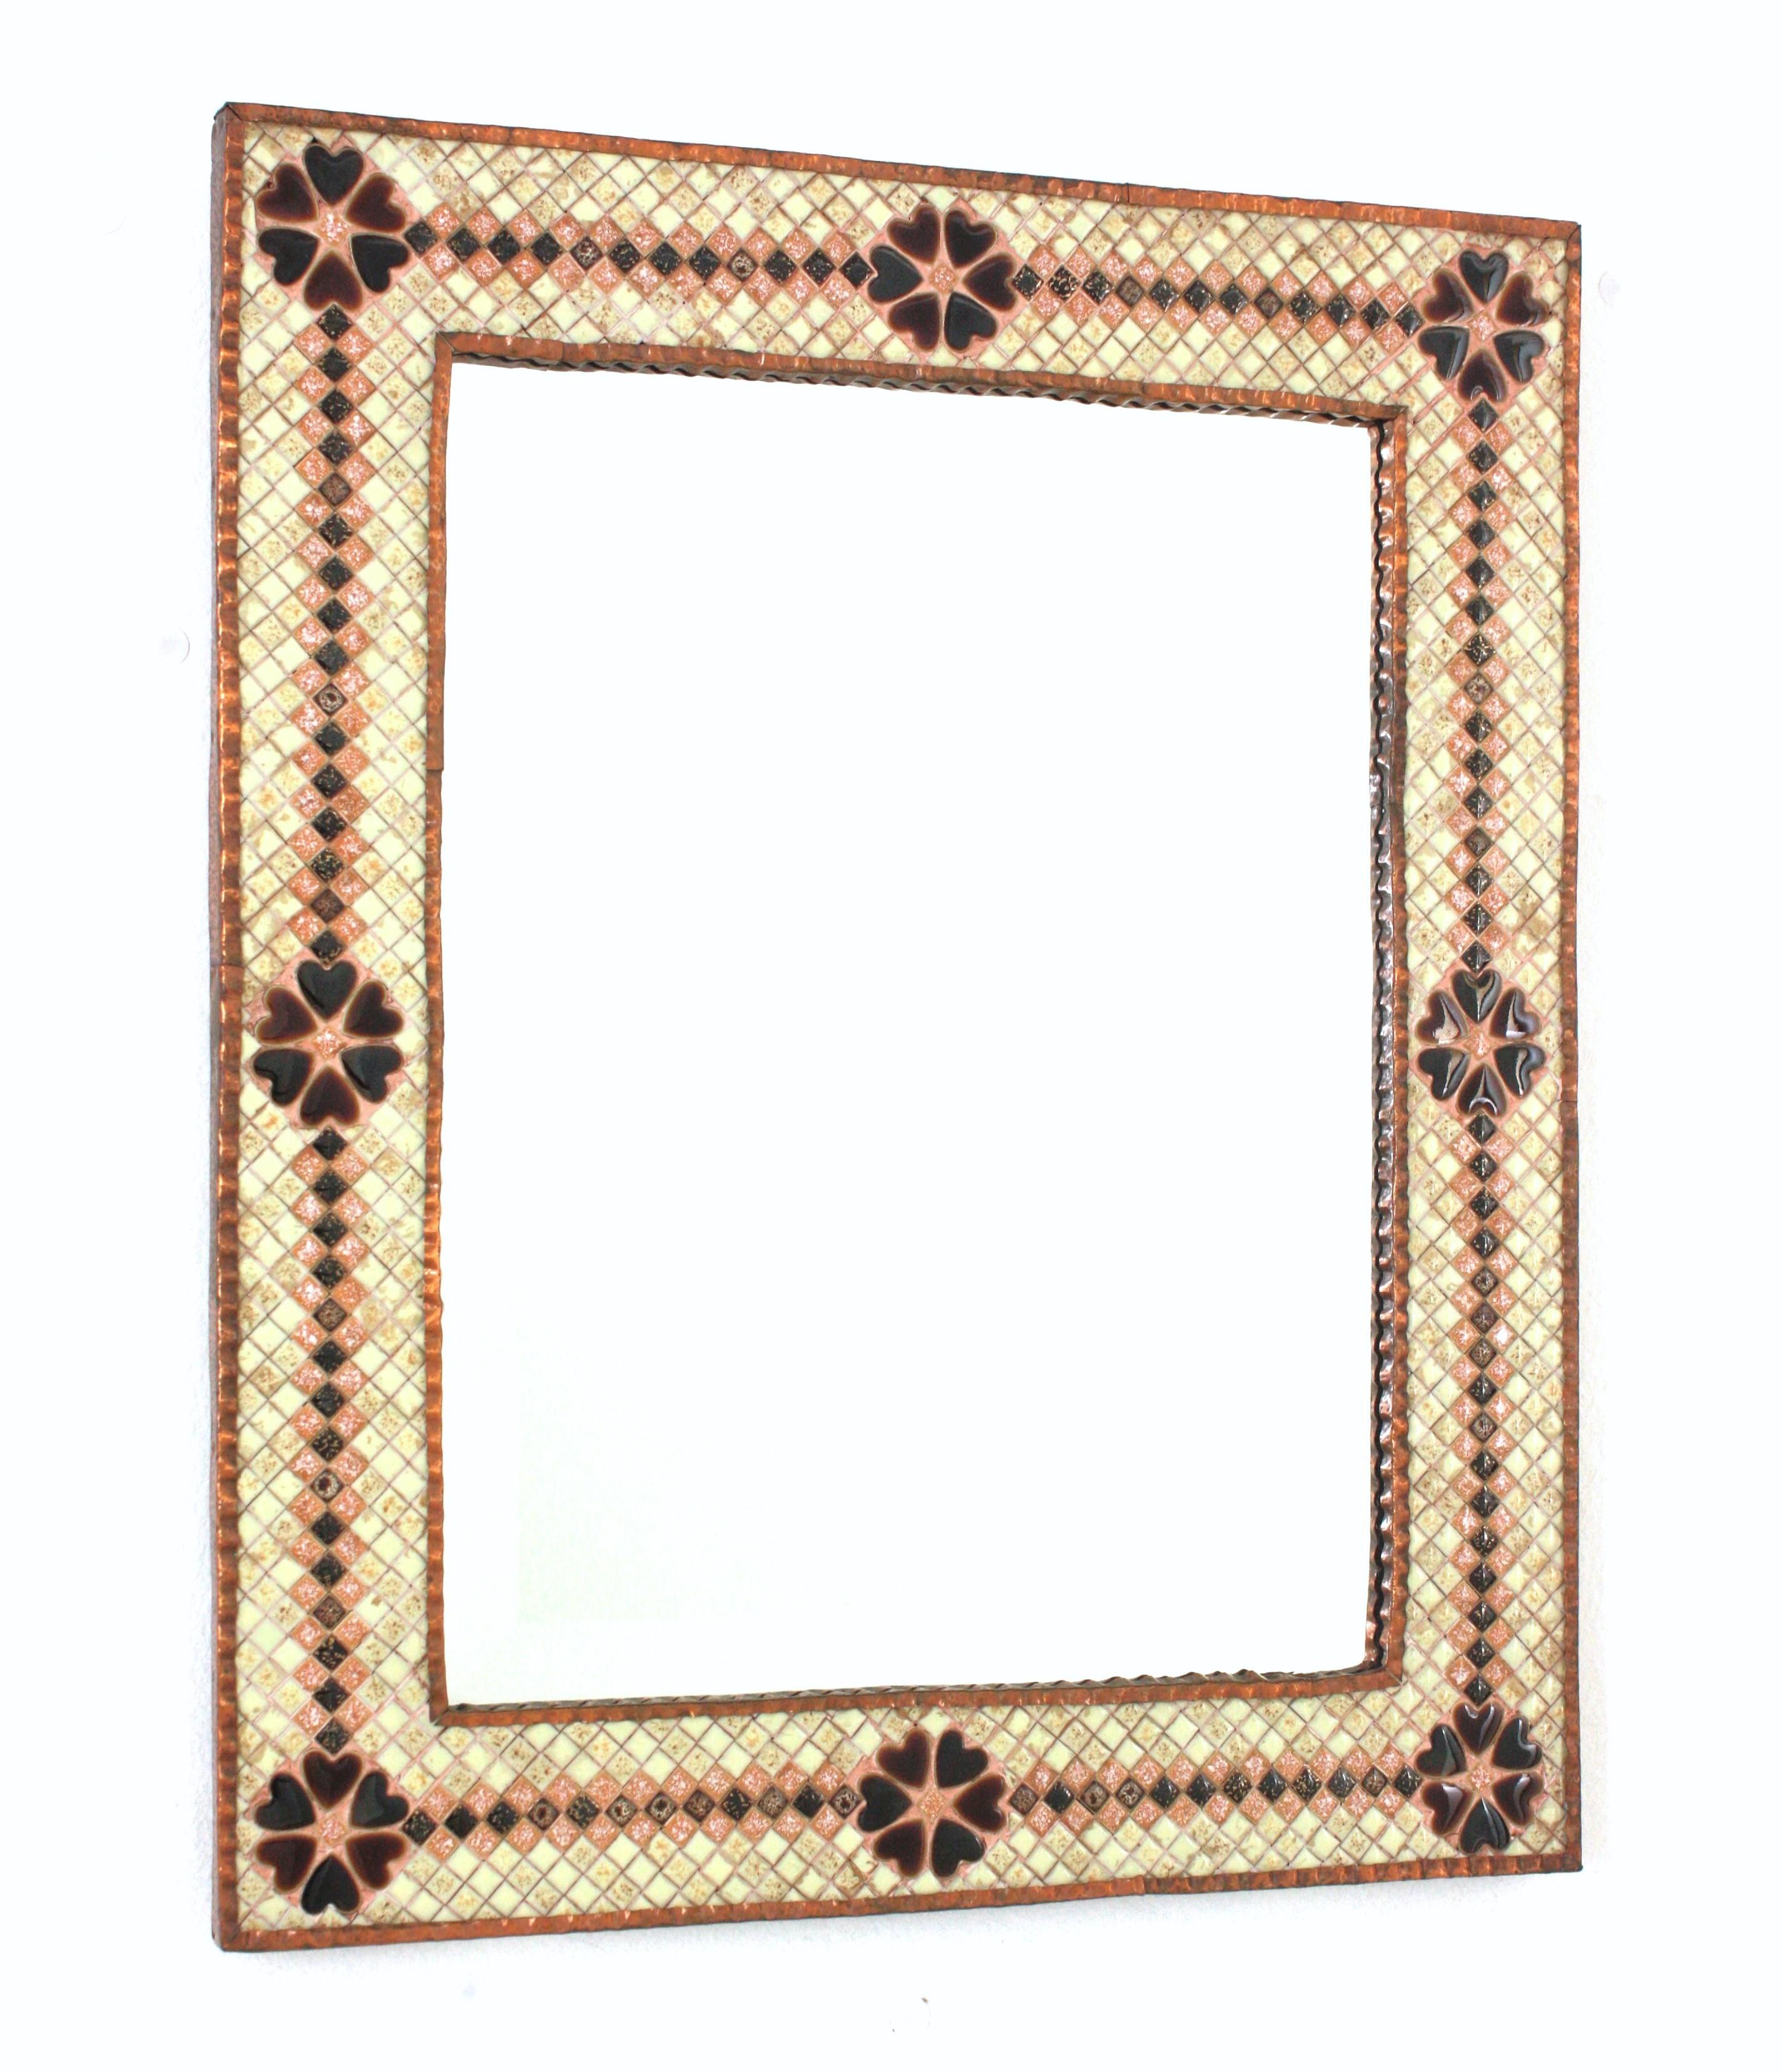 Glazed Ceramic and Copper Wall Mirror with Mosaic Frame
Mid-Century Modern rectangular mirror framed by a mosaic of squared and heart shaped glazed ceramic tiles, Spain, 1950s-1960s.
Eye-catching hand-crafted mosaic mirror with beige, off white,